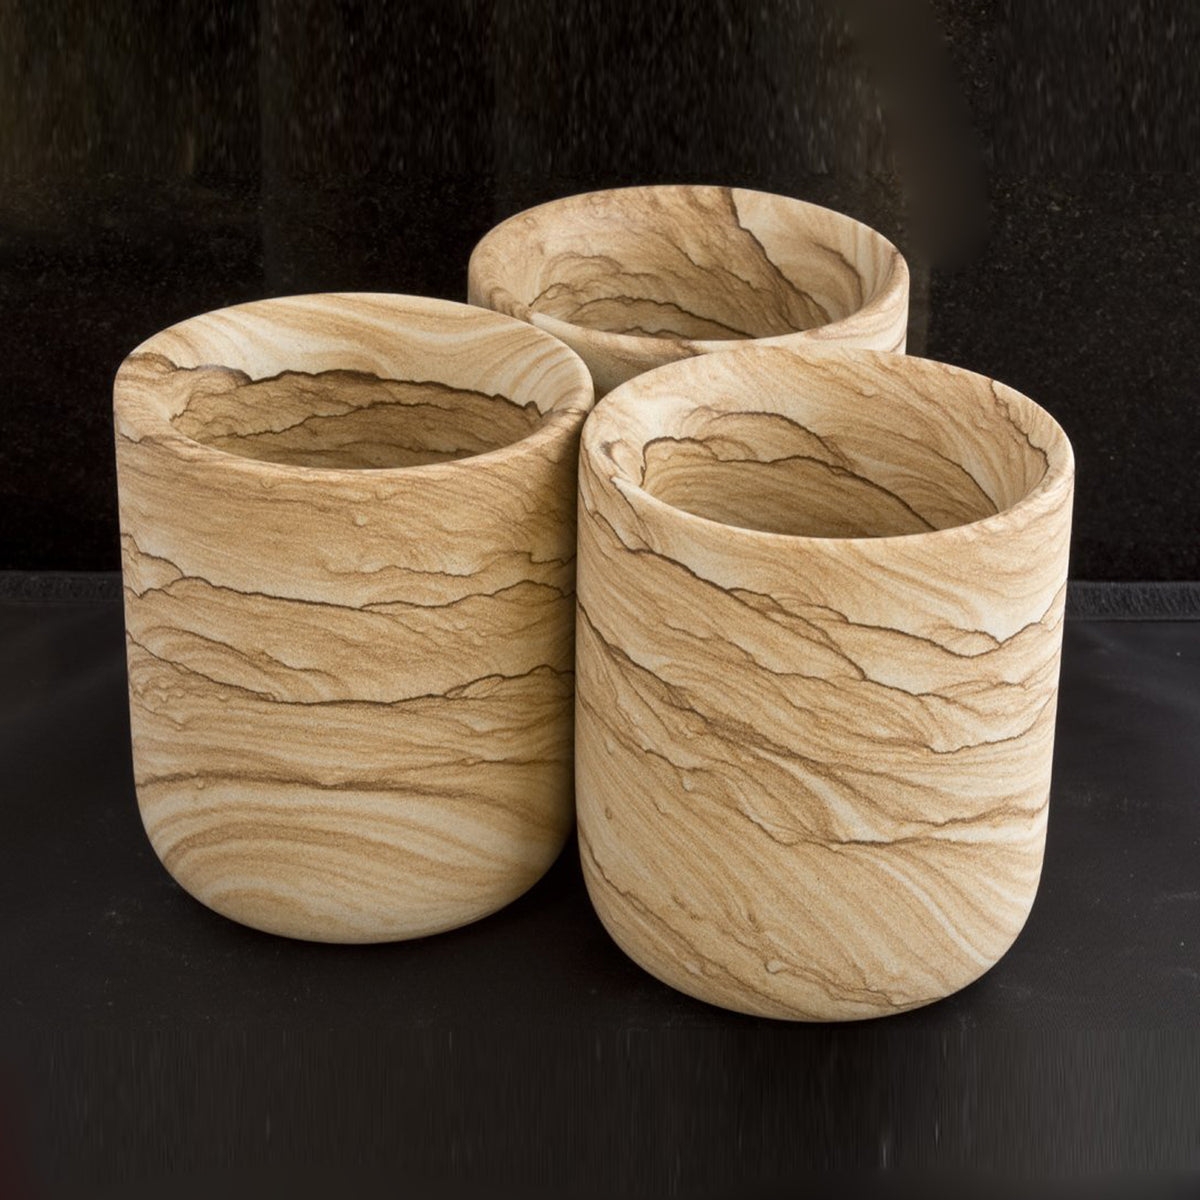 Sandstone Cup - Modern Office Decor - Stone Forest